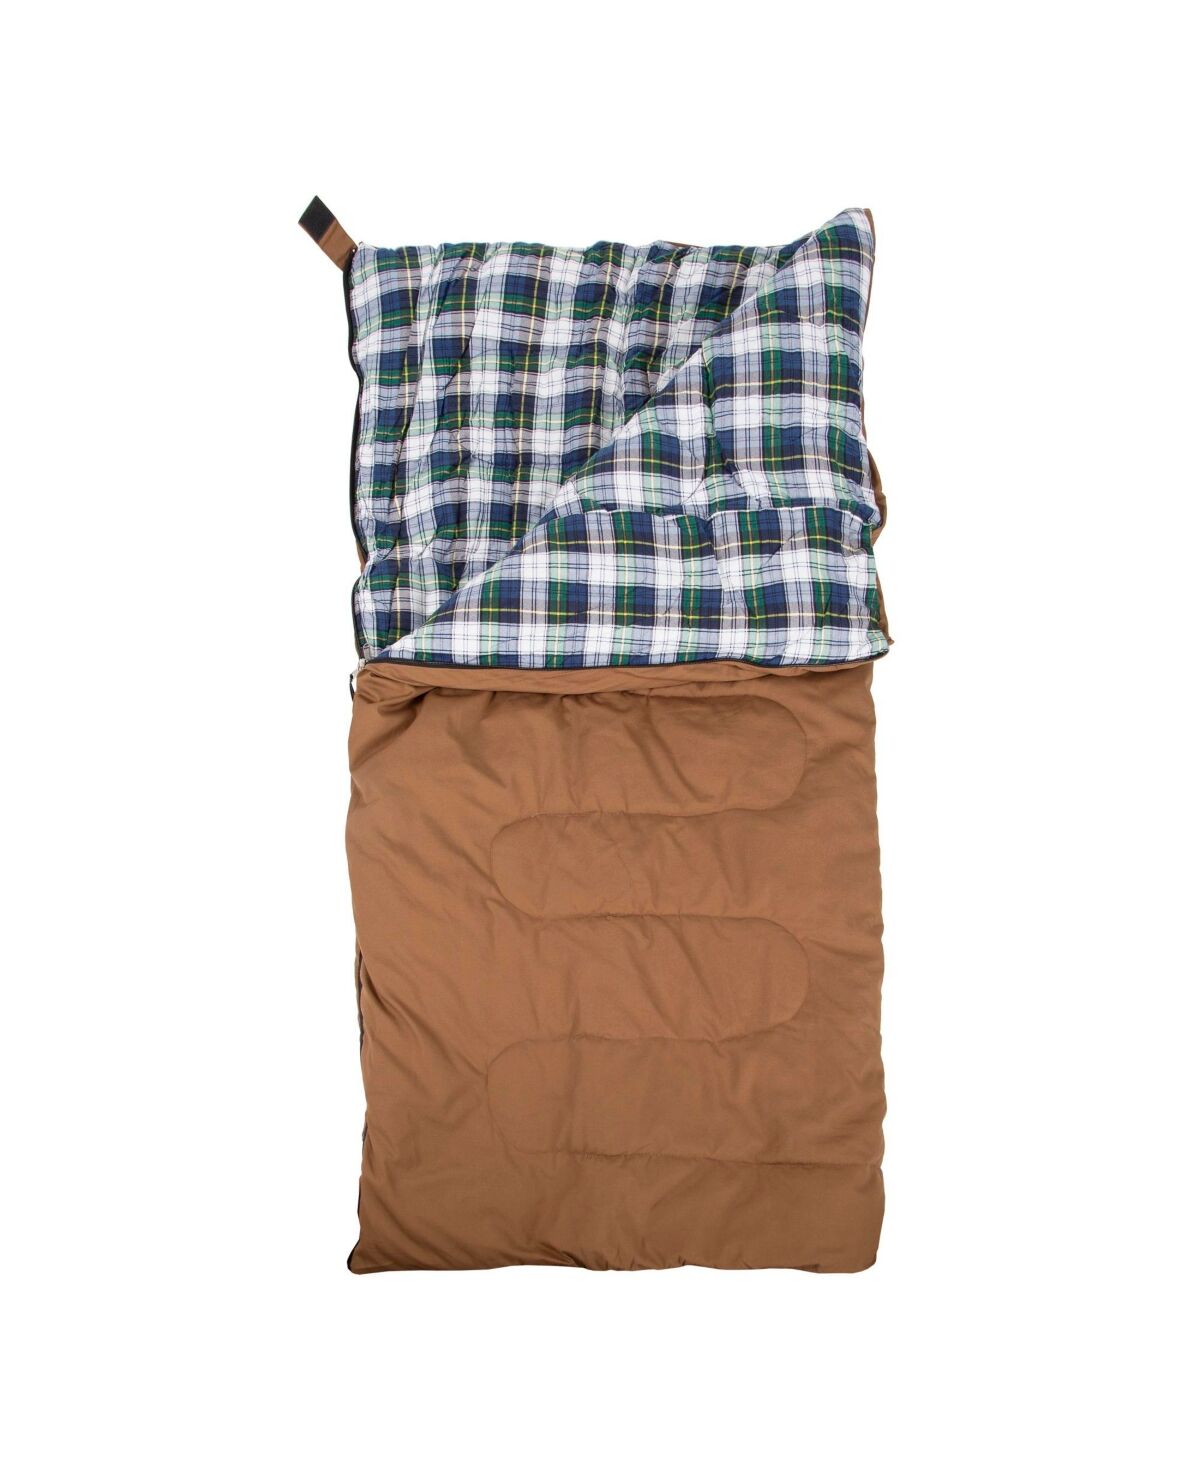 Stansport Stan sport 5 lbs. White Tail Sleeping Bag - Brown